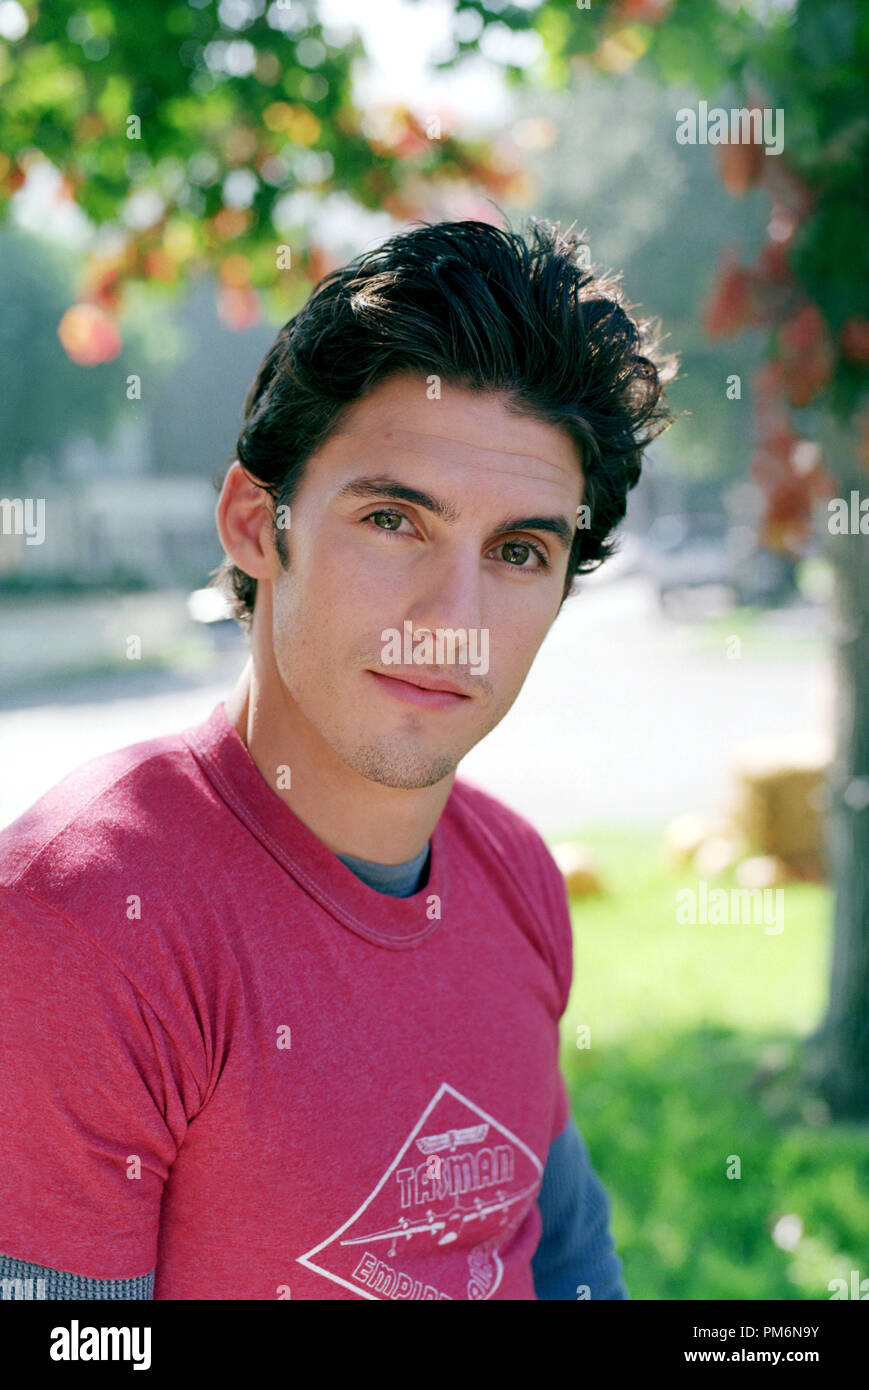 Film Still / Publicity Still from 'Gilmore Girls' (Episode: The Inns & Outs of Inns) Milo Ventimiglia 2001 Photo credit: Ron Tom   File Reference # 30847955THA  For Editorial Use Only -  All Rights Reserved Stock Photo